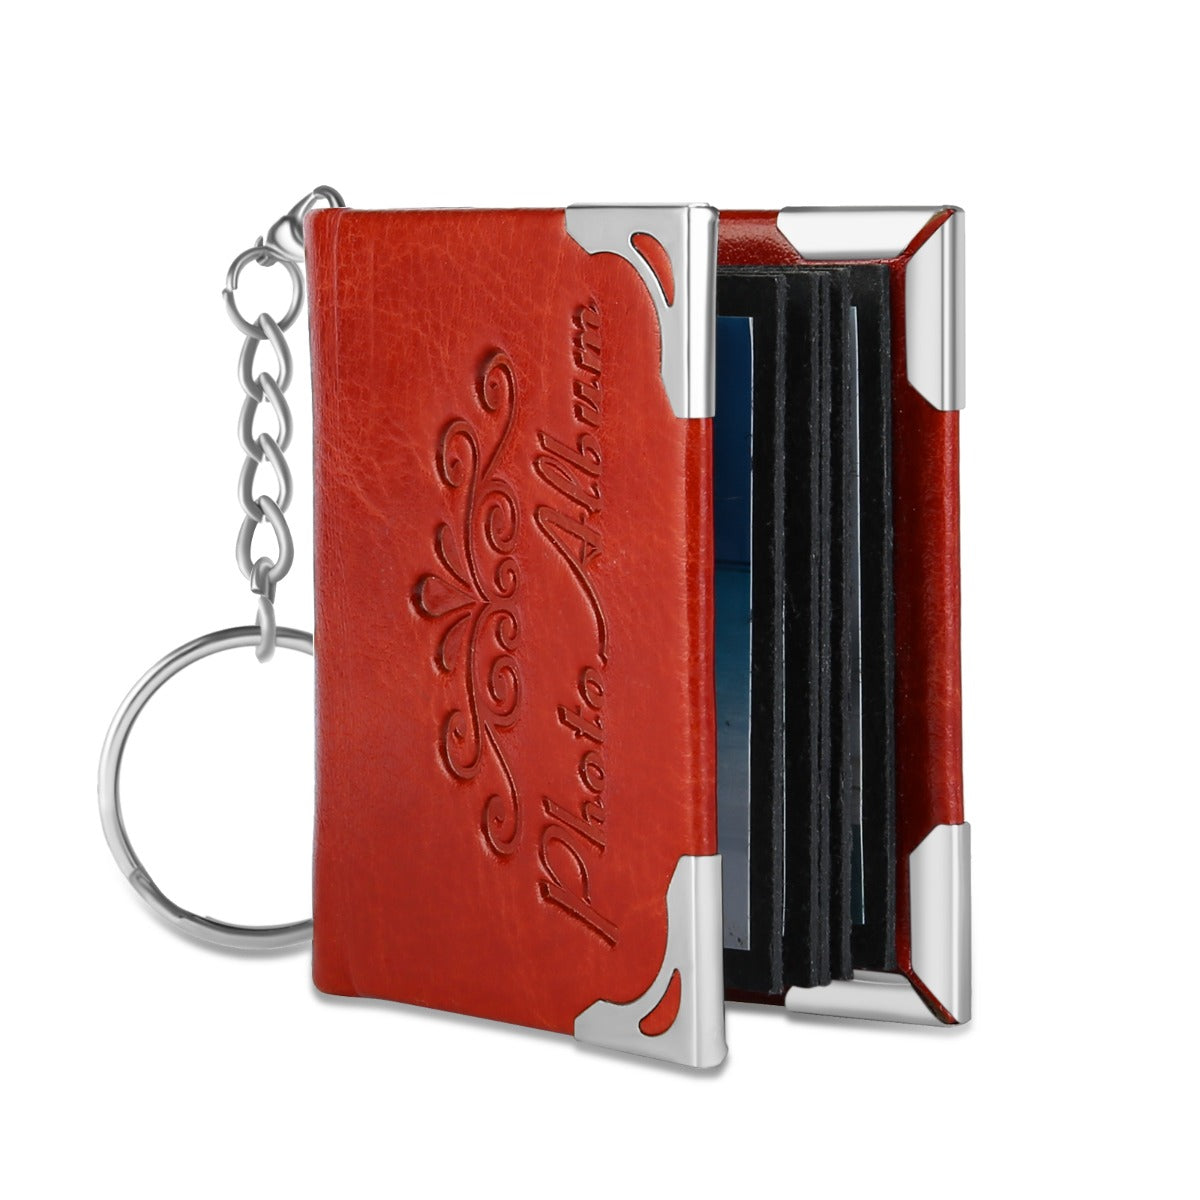 12 Photo Photo Mini Album Leather Keychain Personalized Gift Customizable  Photo Album Key Chain Blue Genuine Leather Keyring Cherish Memory - The Art  of Handcrafted Fashion: How Custom Bags Define Personal Style